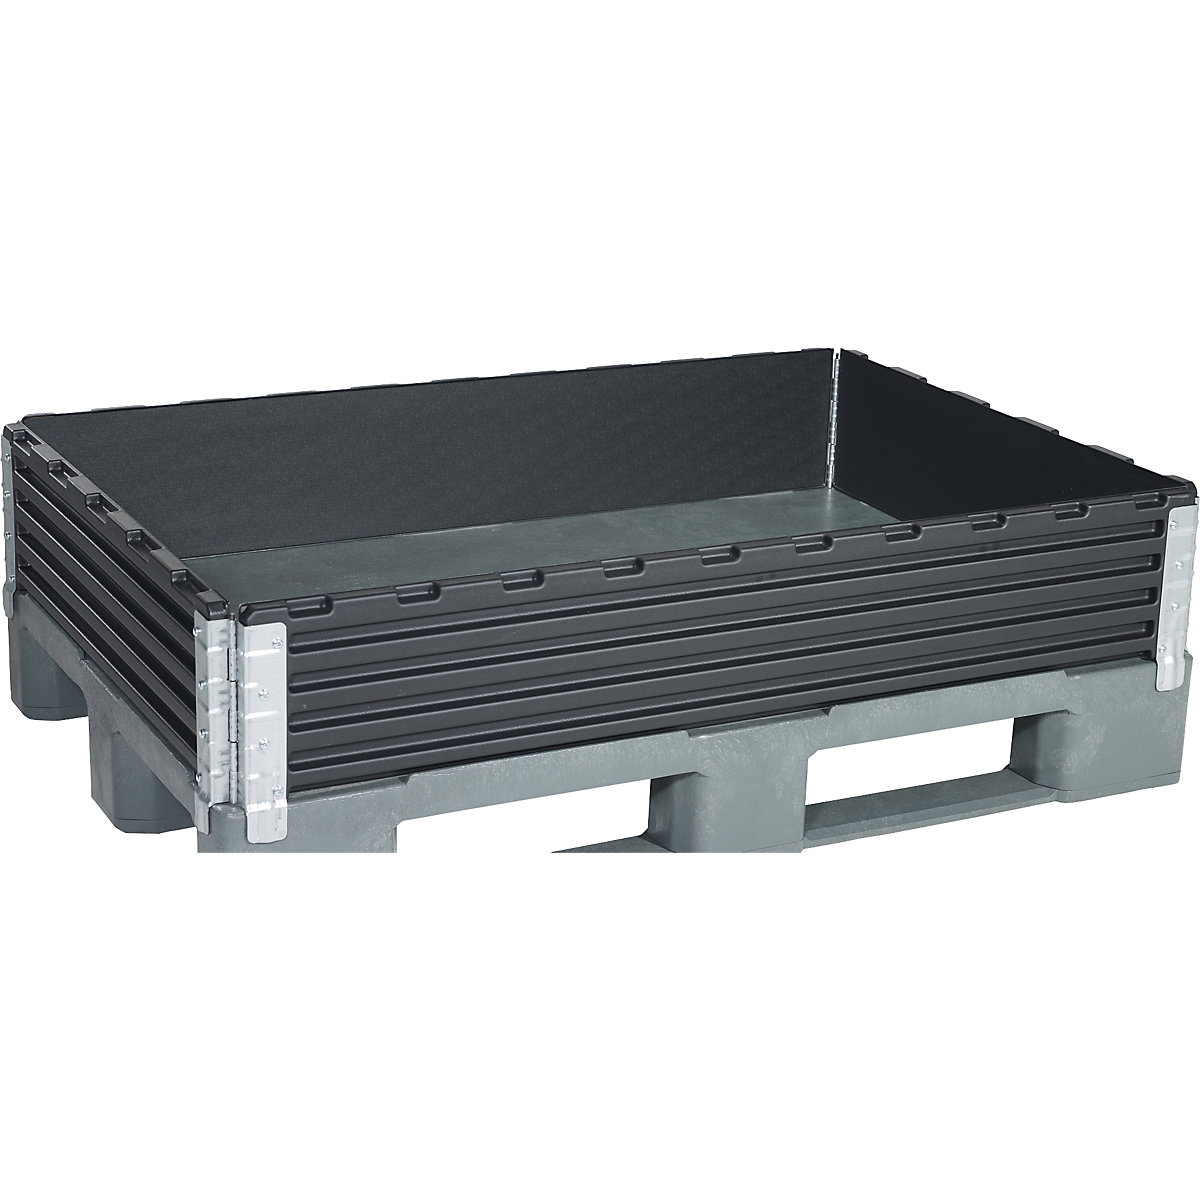 Plastic pallet collar, pack of 2, for 1200 x 800 mm Euro pallet, diagonally folding, with 4 hinges-1